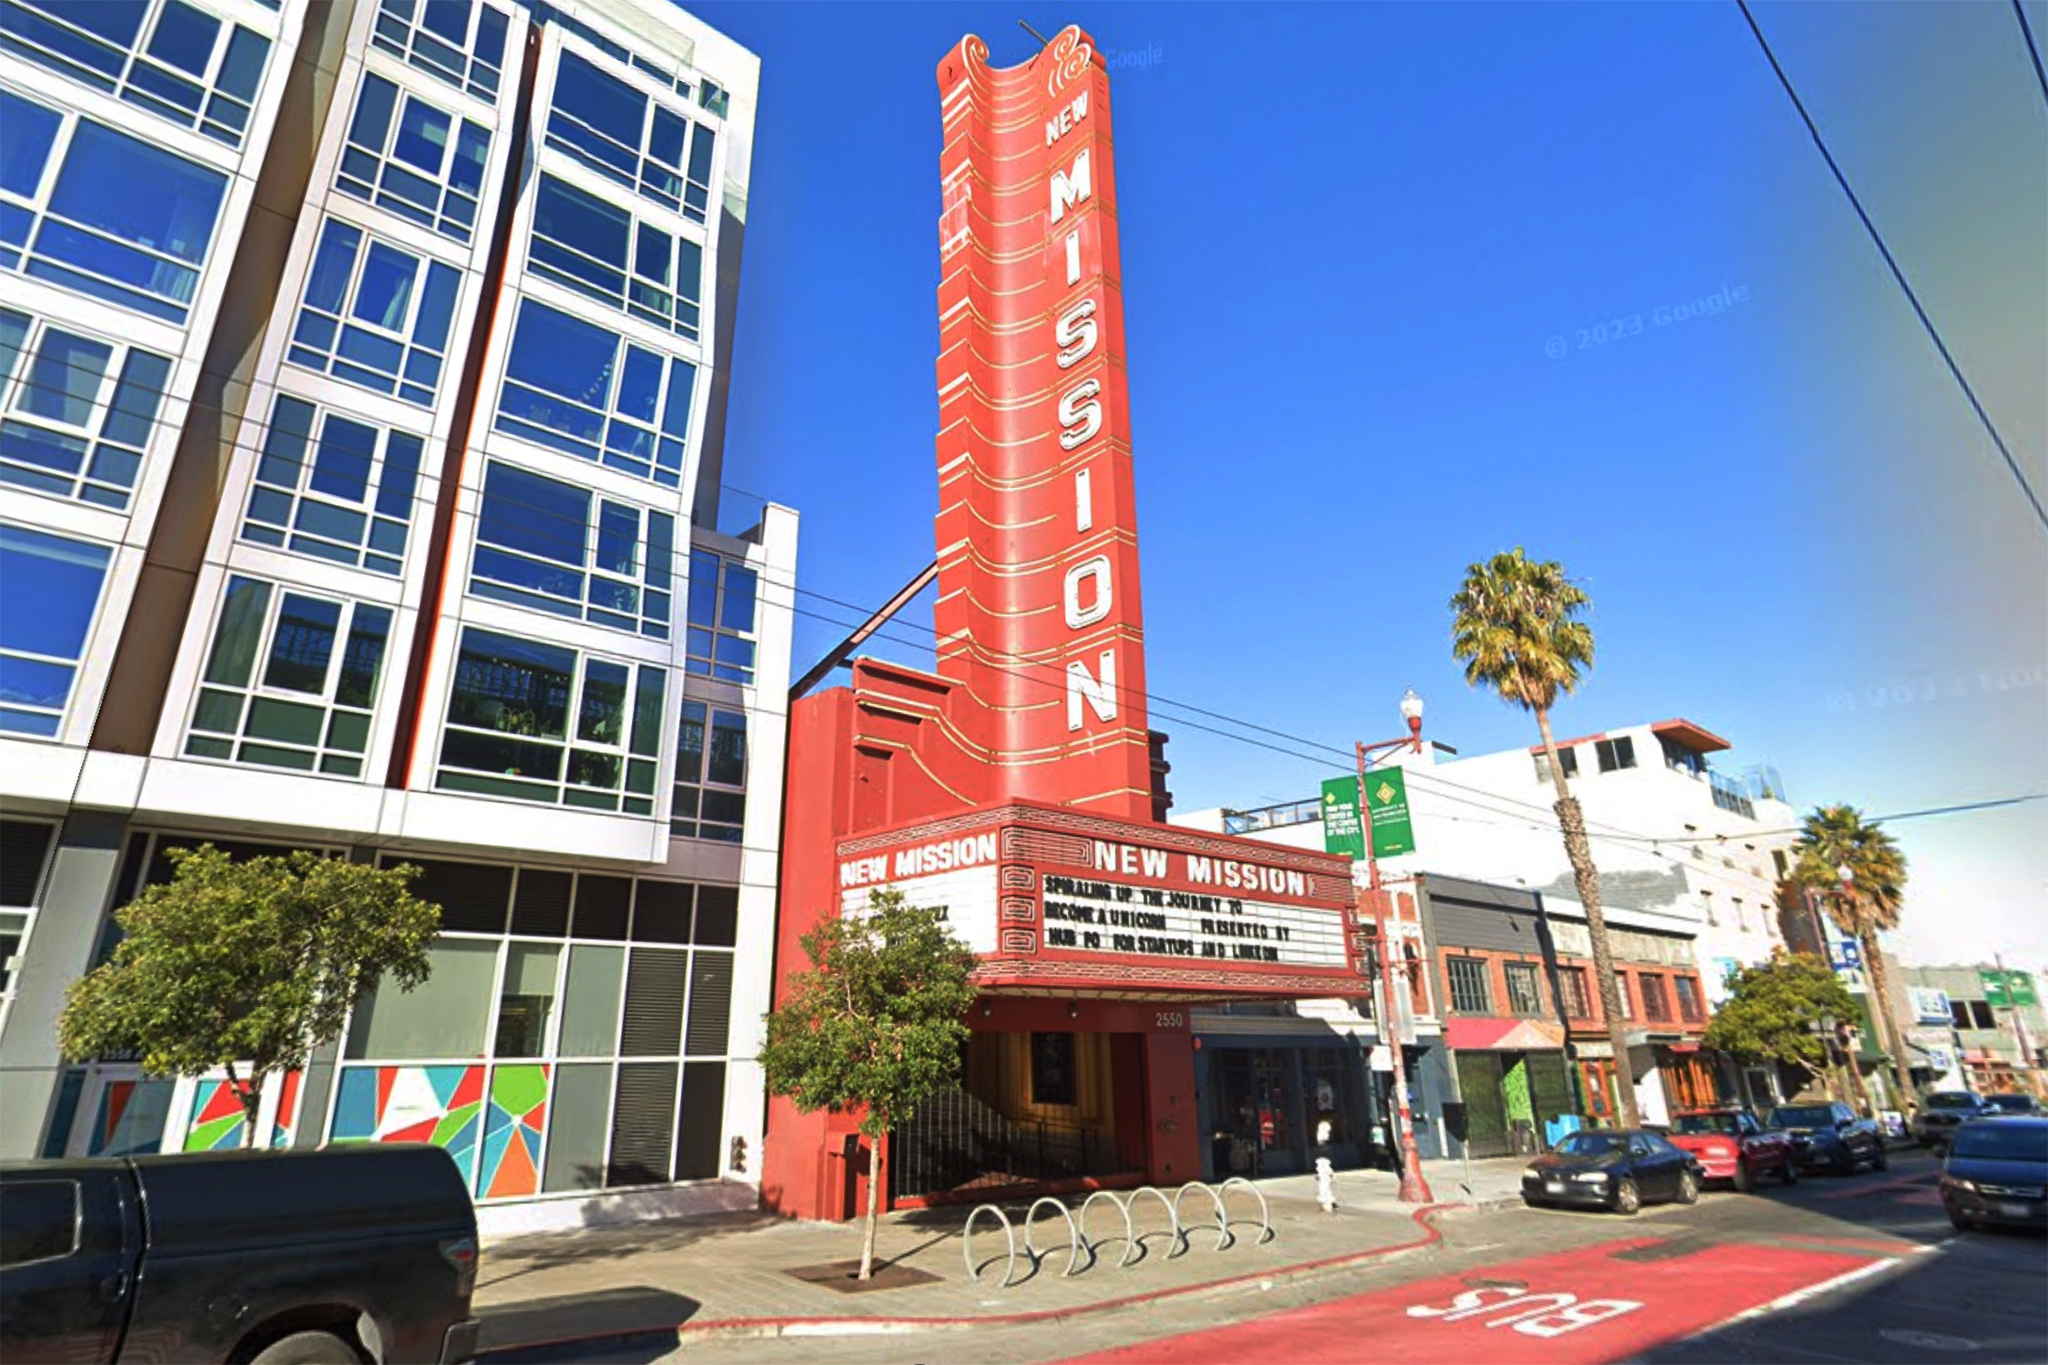 Popular SF movie theater accused of harassment, groping in lawsuit